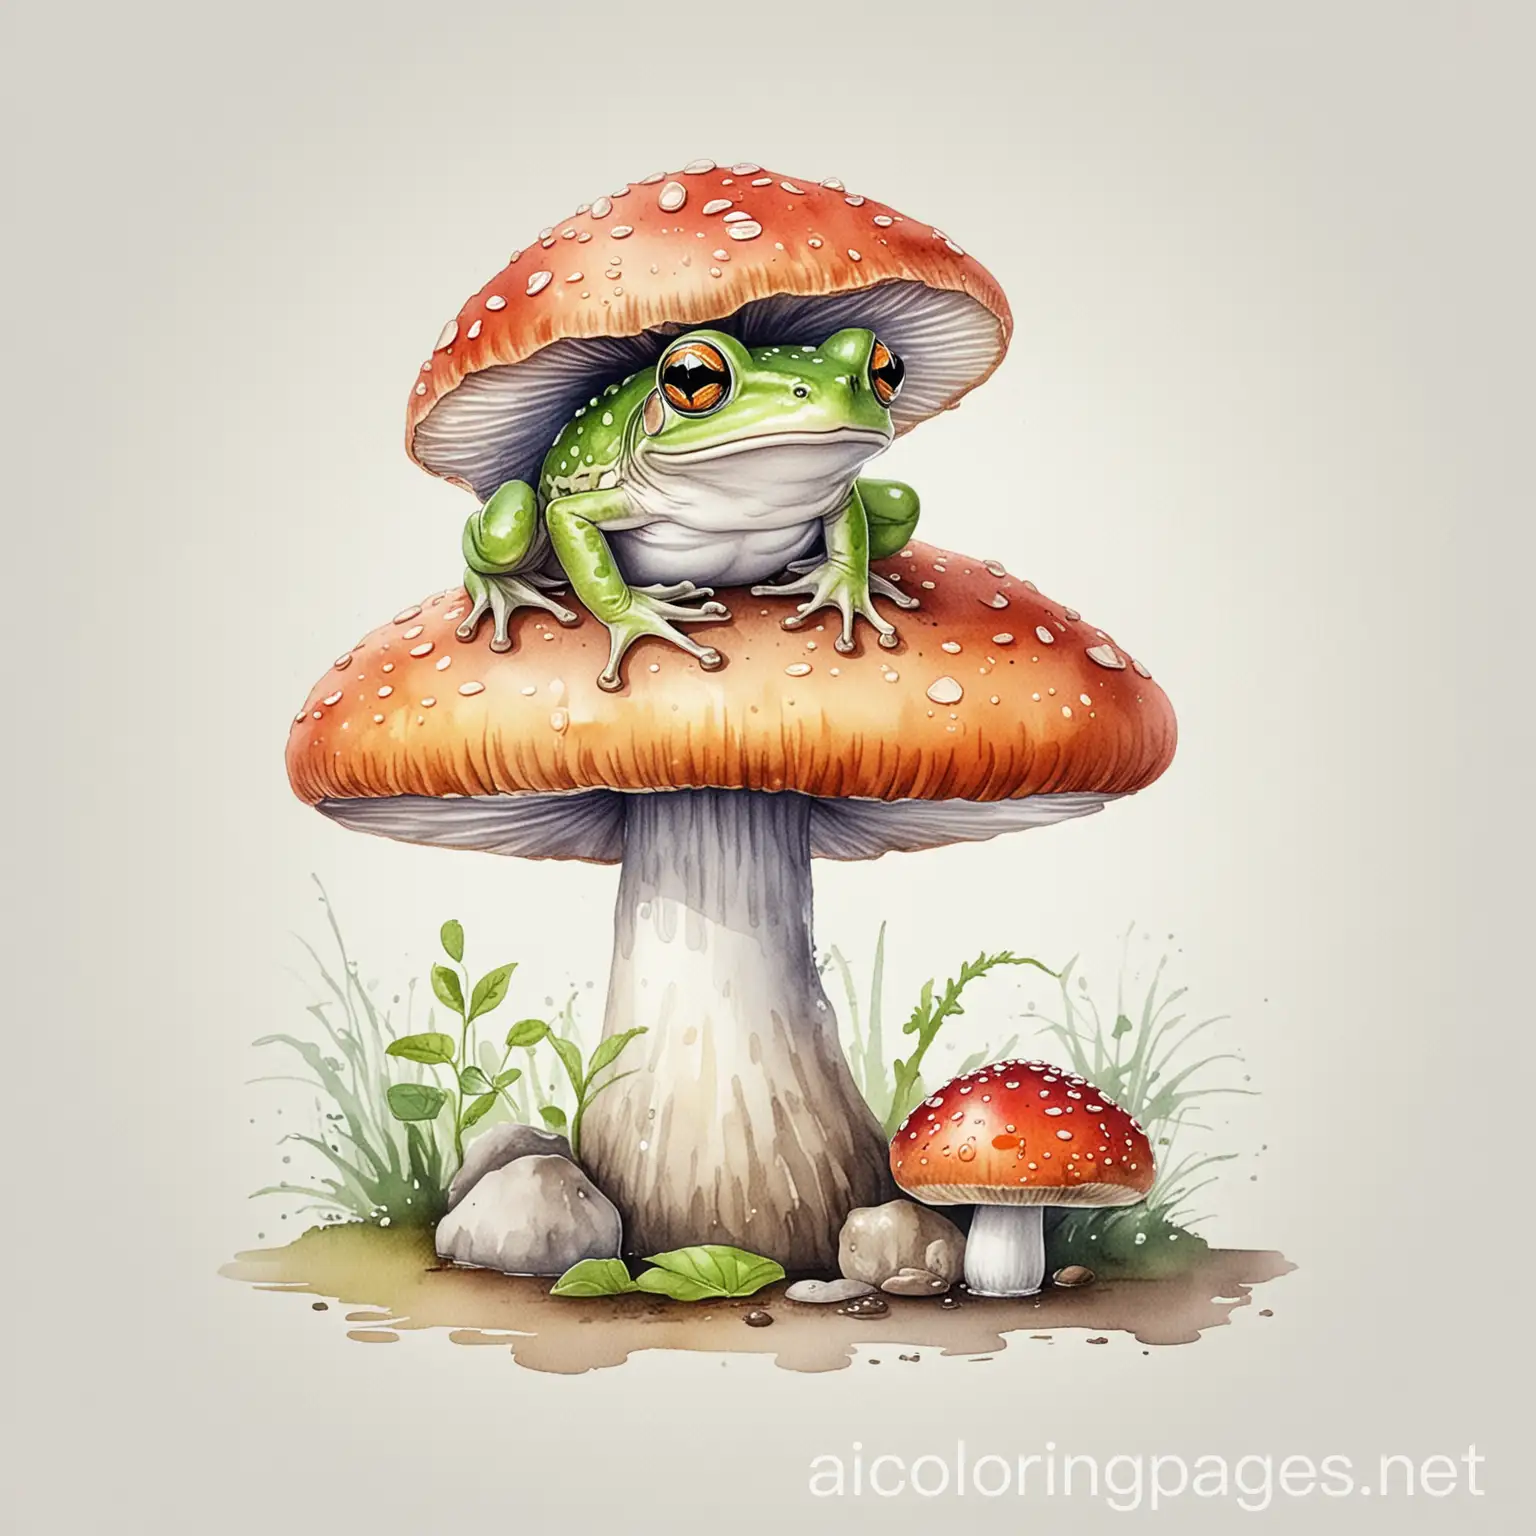 Cute small frog on a single mushroom Watercolor Illustration, Coloring Page, black and white, line art, white background, Simplicity, Ample White Space. The background of the coloring page is plain white to make it easy for young children to color within the lines. The outlines of all the subjects are easy to distinguish, making it simple for kids to color without too much difficulty